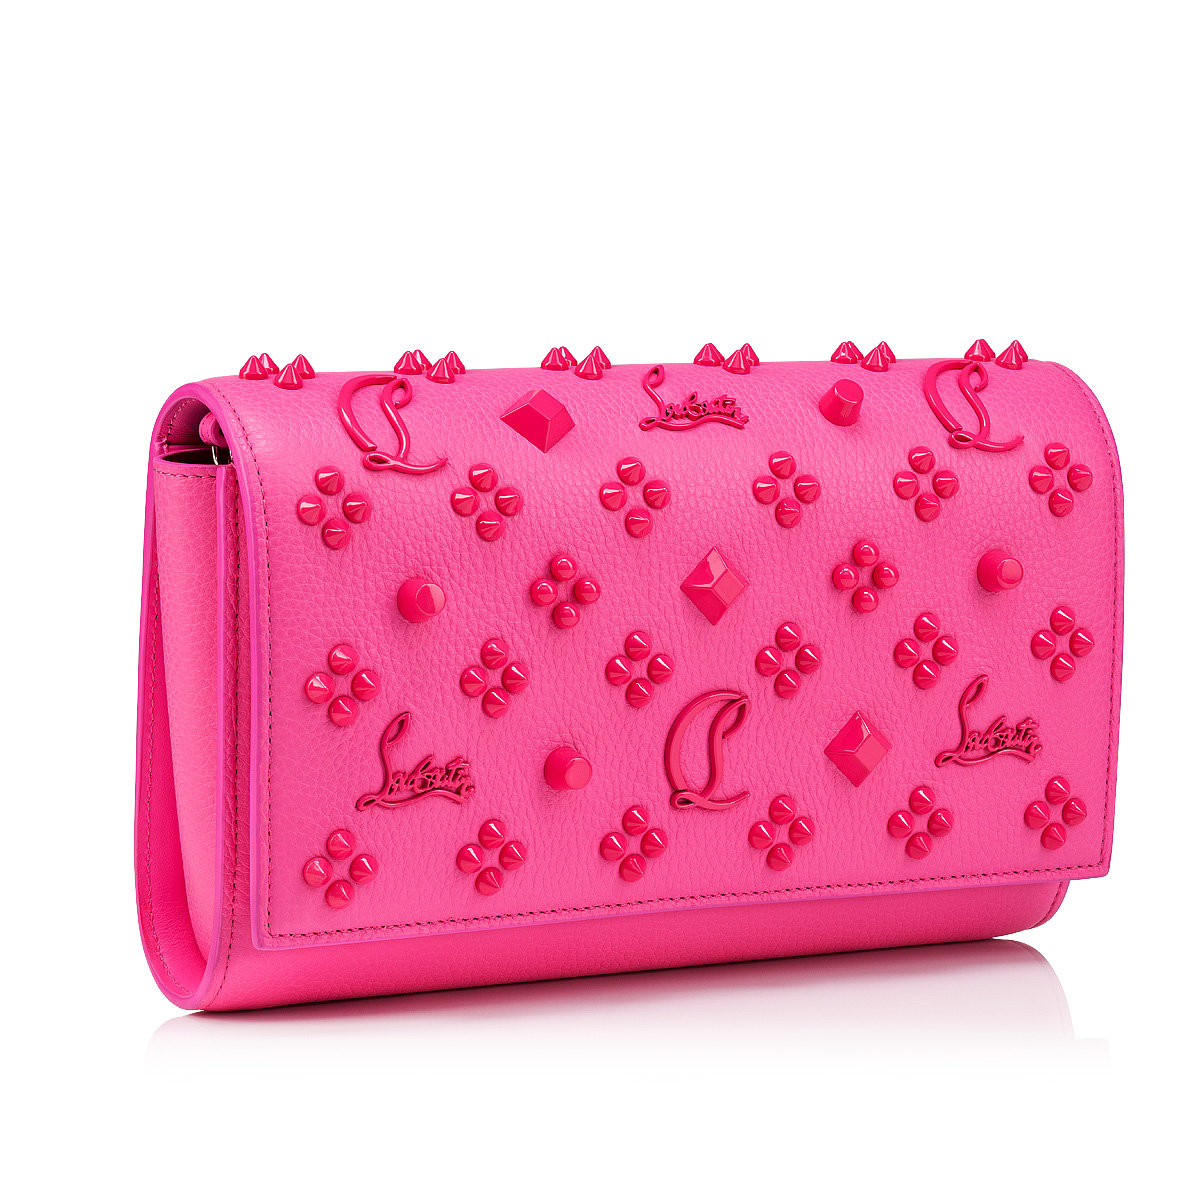 Paloma - Clutch - Grained calf leather and spikes Loubinthesky